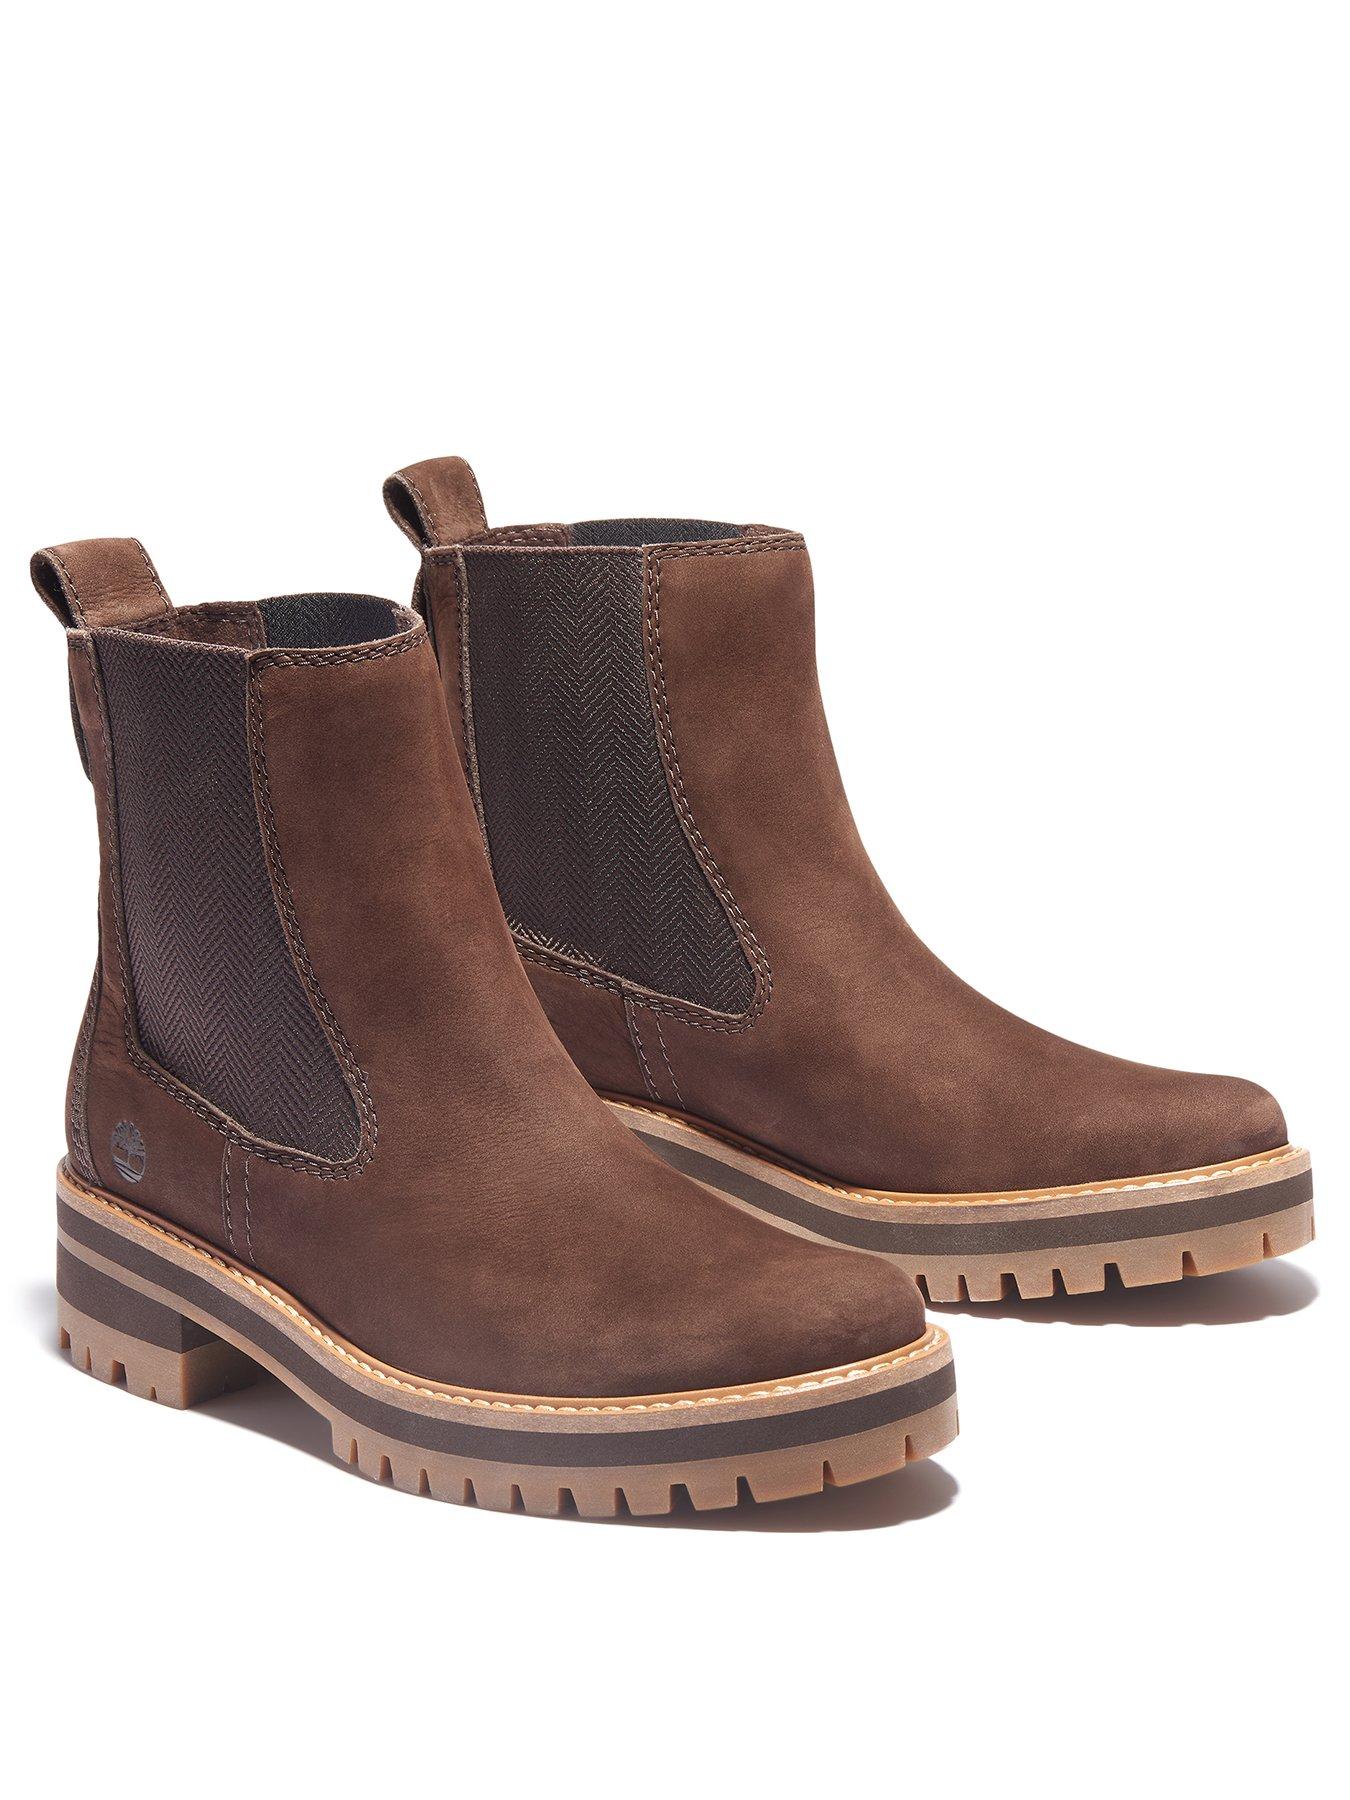 Womens Timberland Boots | Very.co.uk